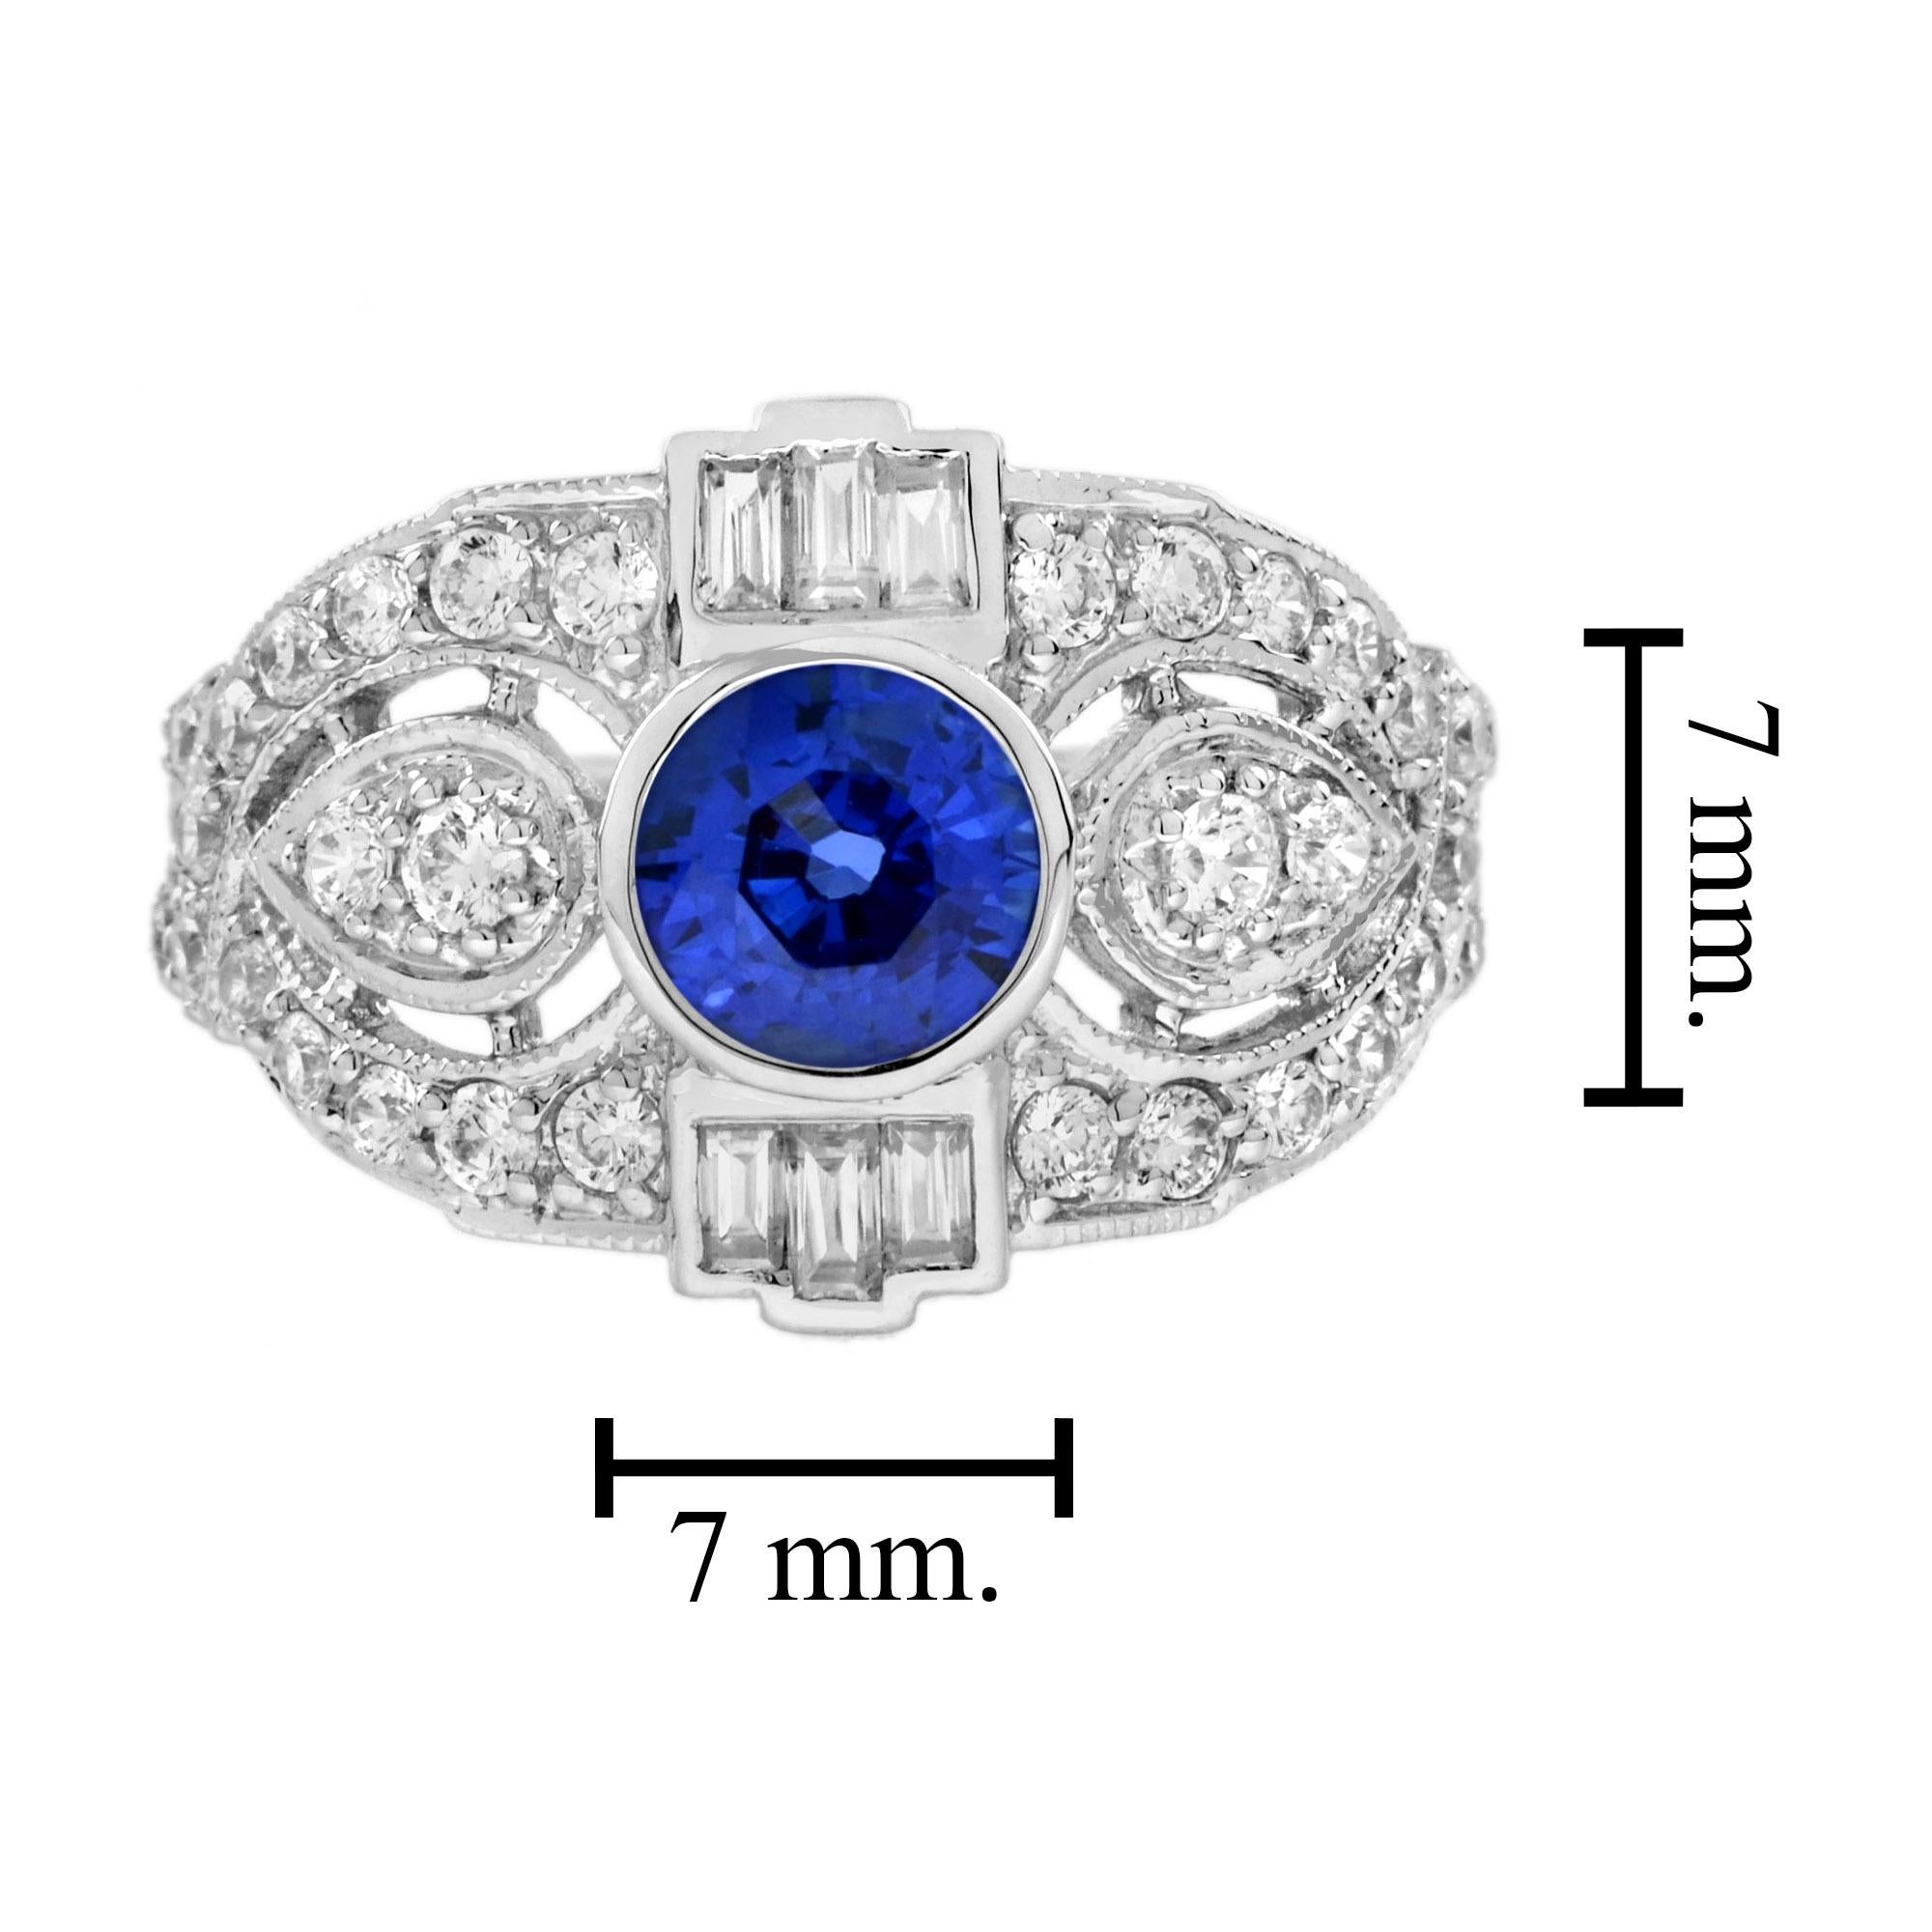 For Sale:  Ceylon Sapphire and Diamond Art Deco Style Engagement Ring in 18K White Gold 7